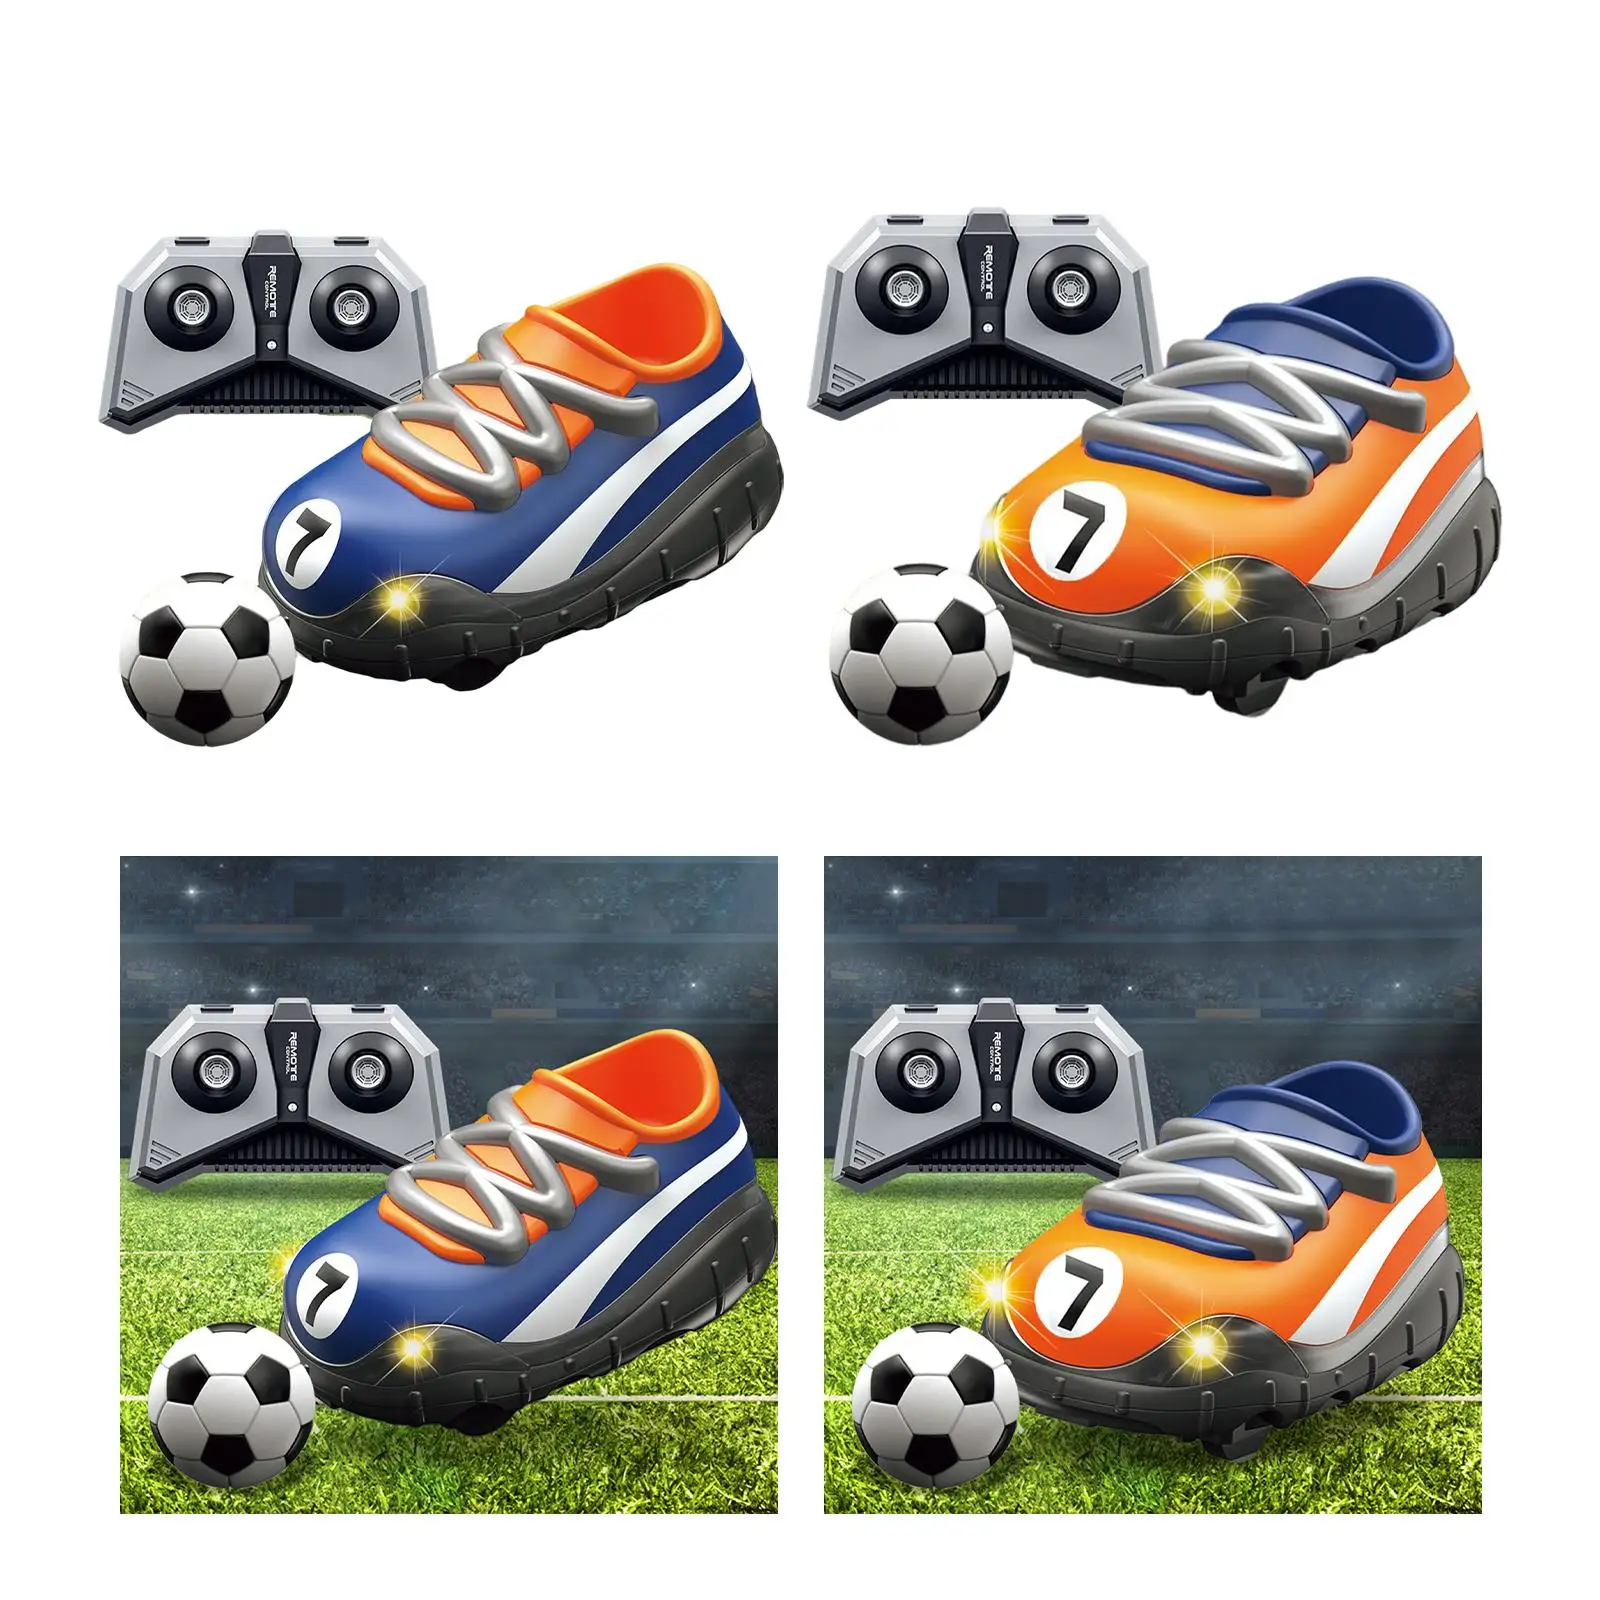 4 Channels RC Football Cars with LED Light Turn Right for Children Birthday Gifts